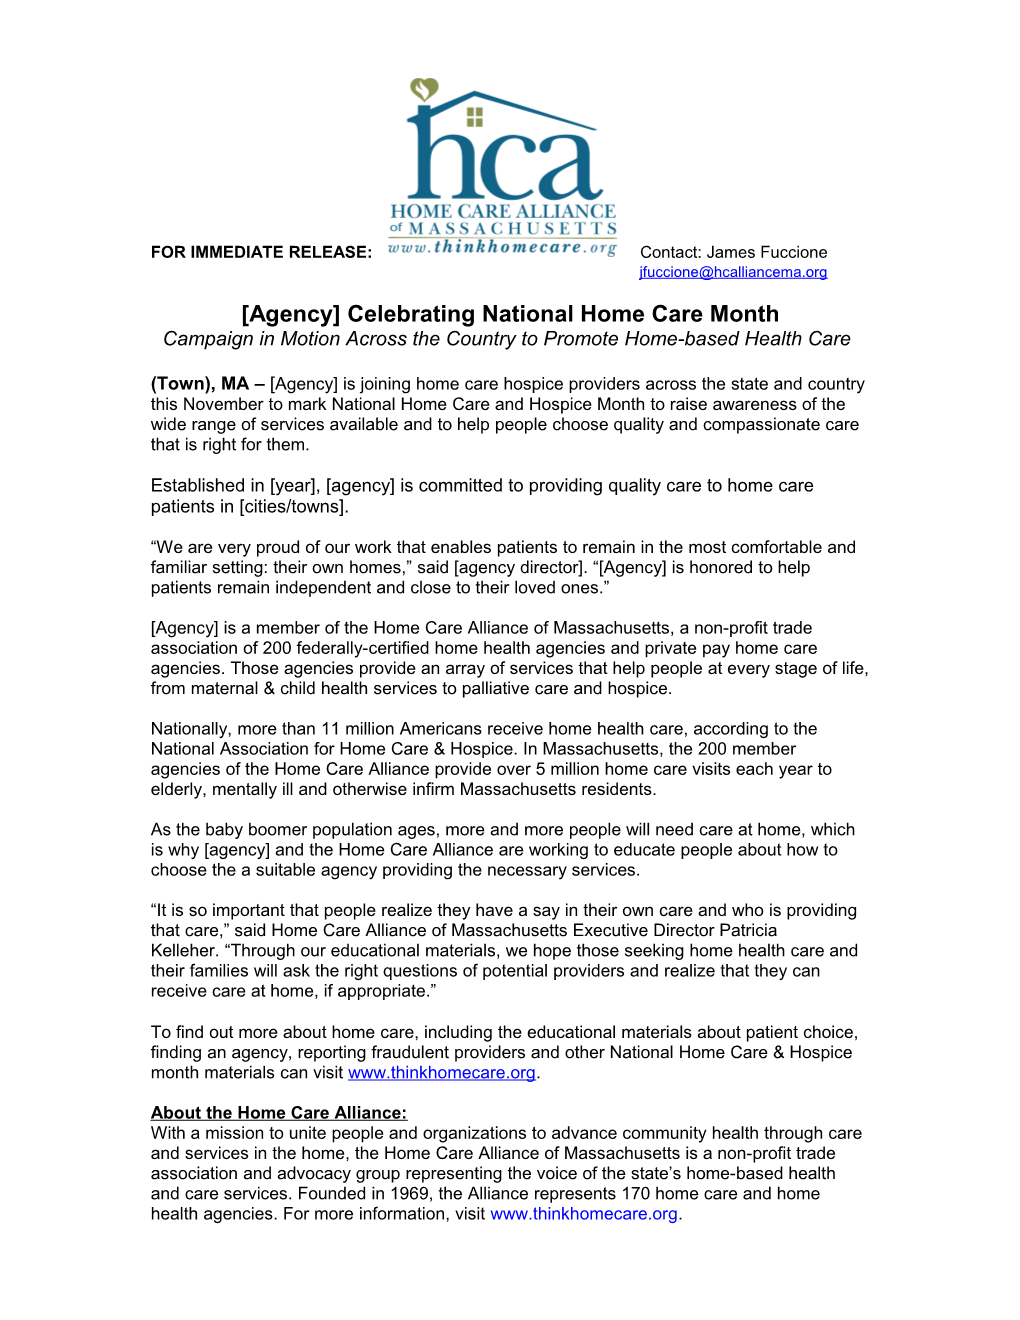 Agency Celebrating National Home Care Month